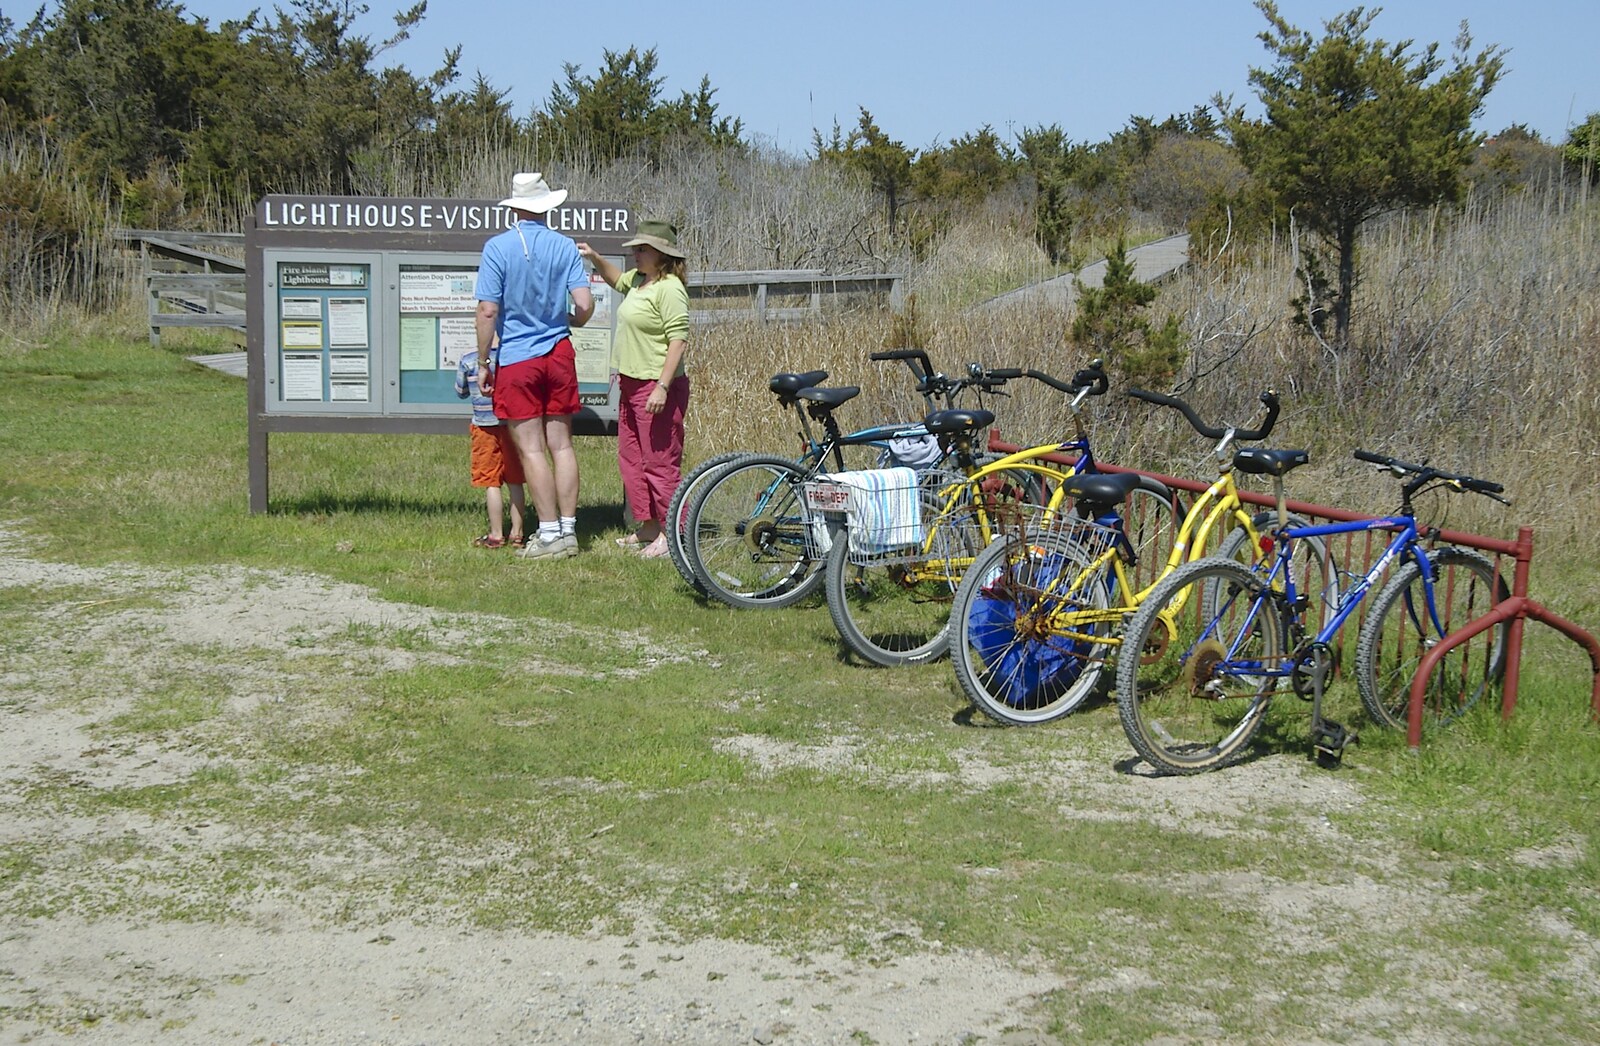 We park the bikes and check the information board from Phil and the Fair Harbor Fire Engine, Fire Island, New York State, US - 30th April 2006